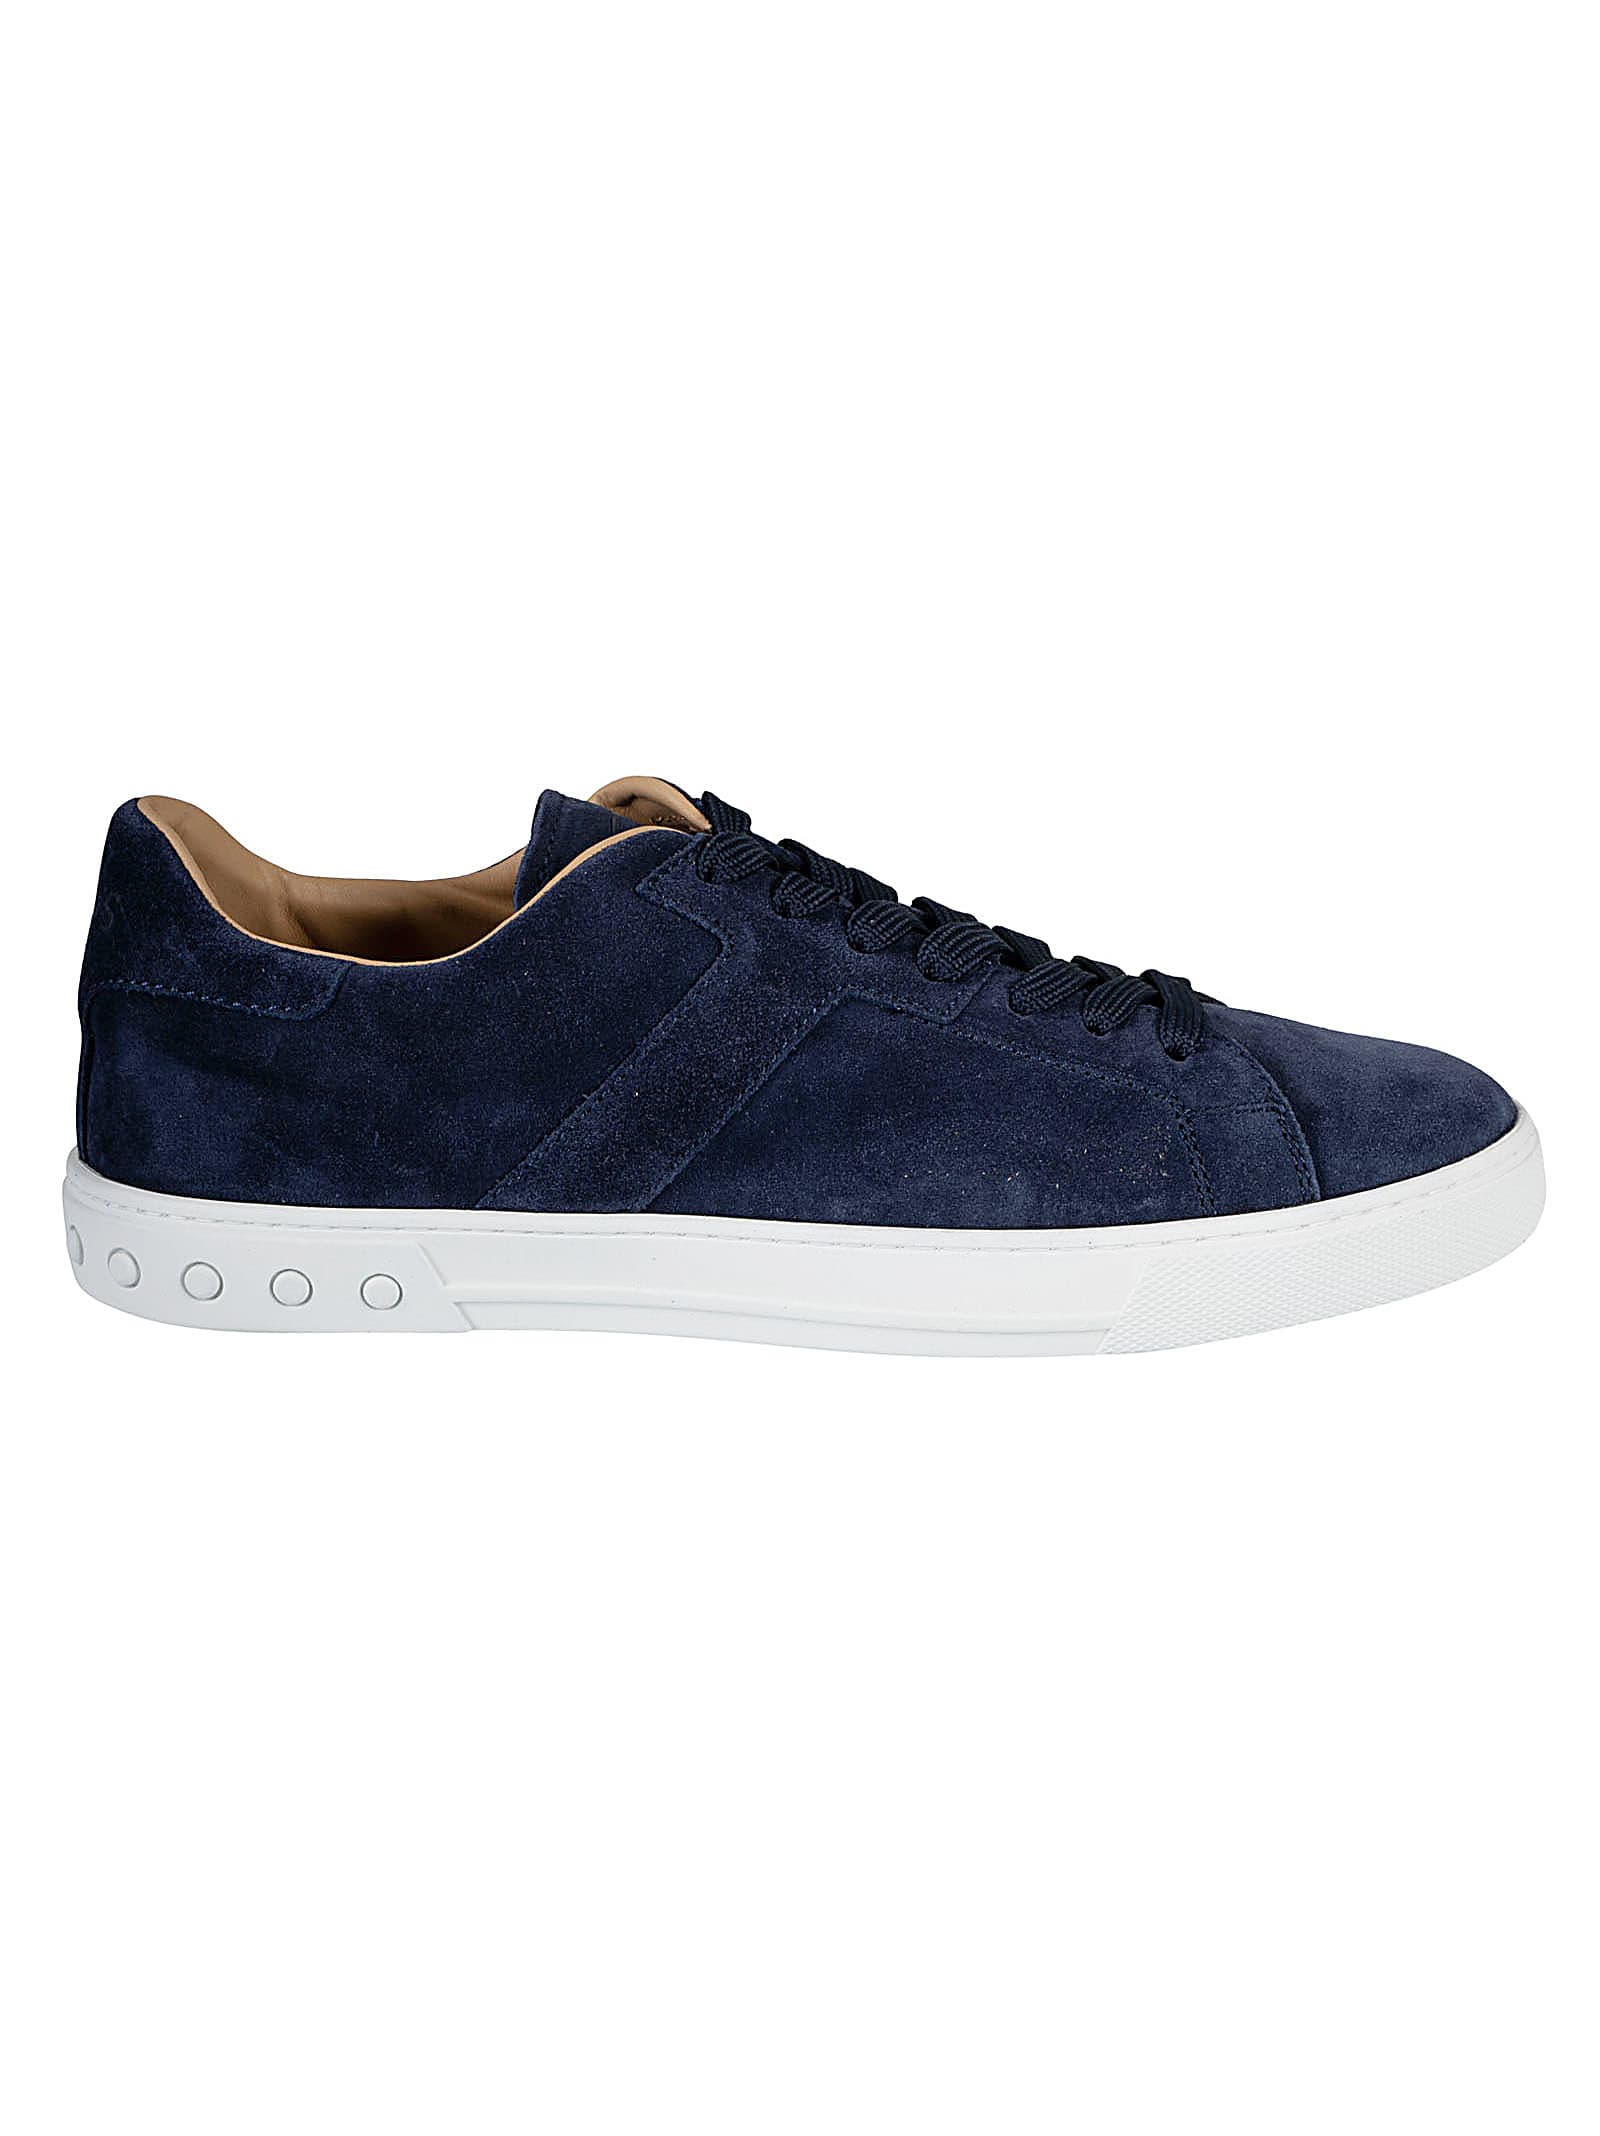 Tods Classic Lace-up Sneakers